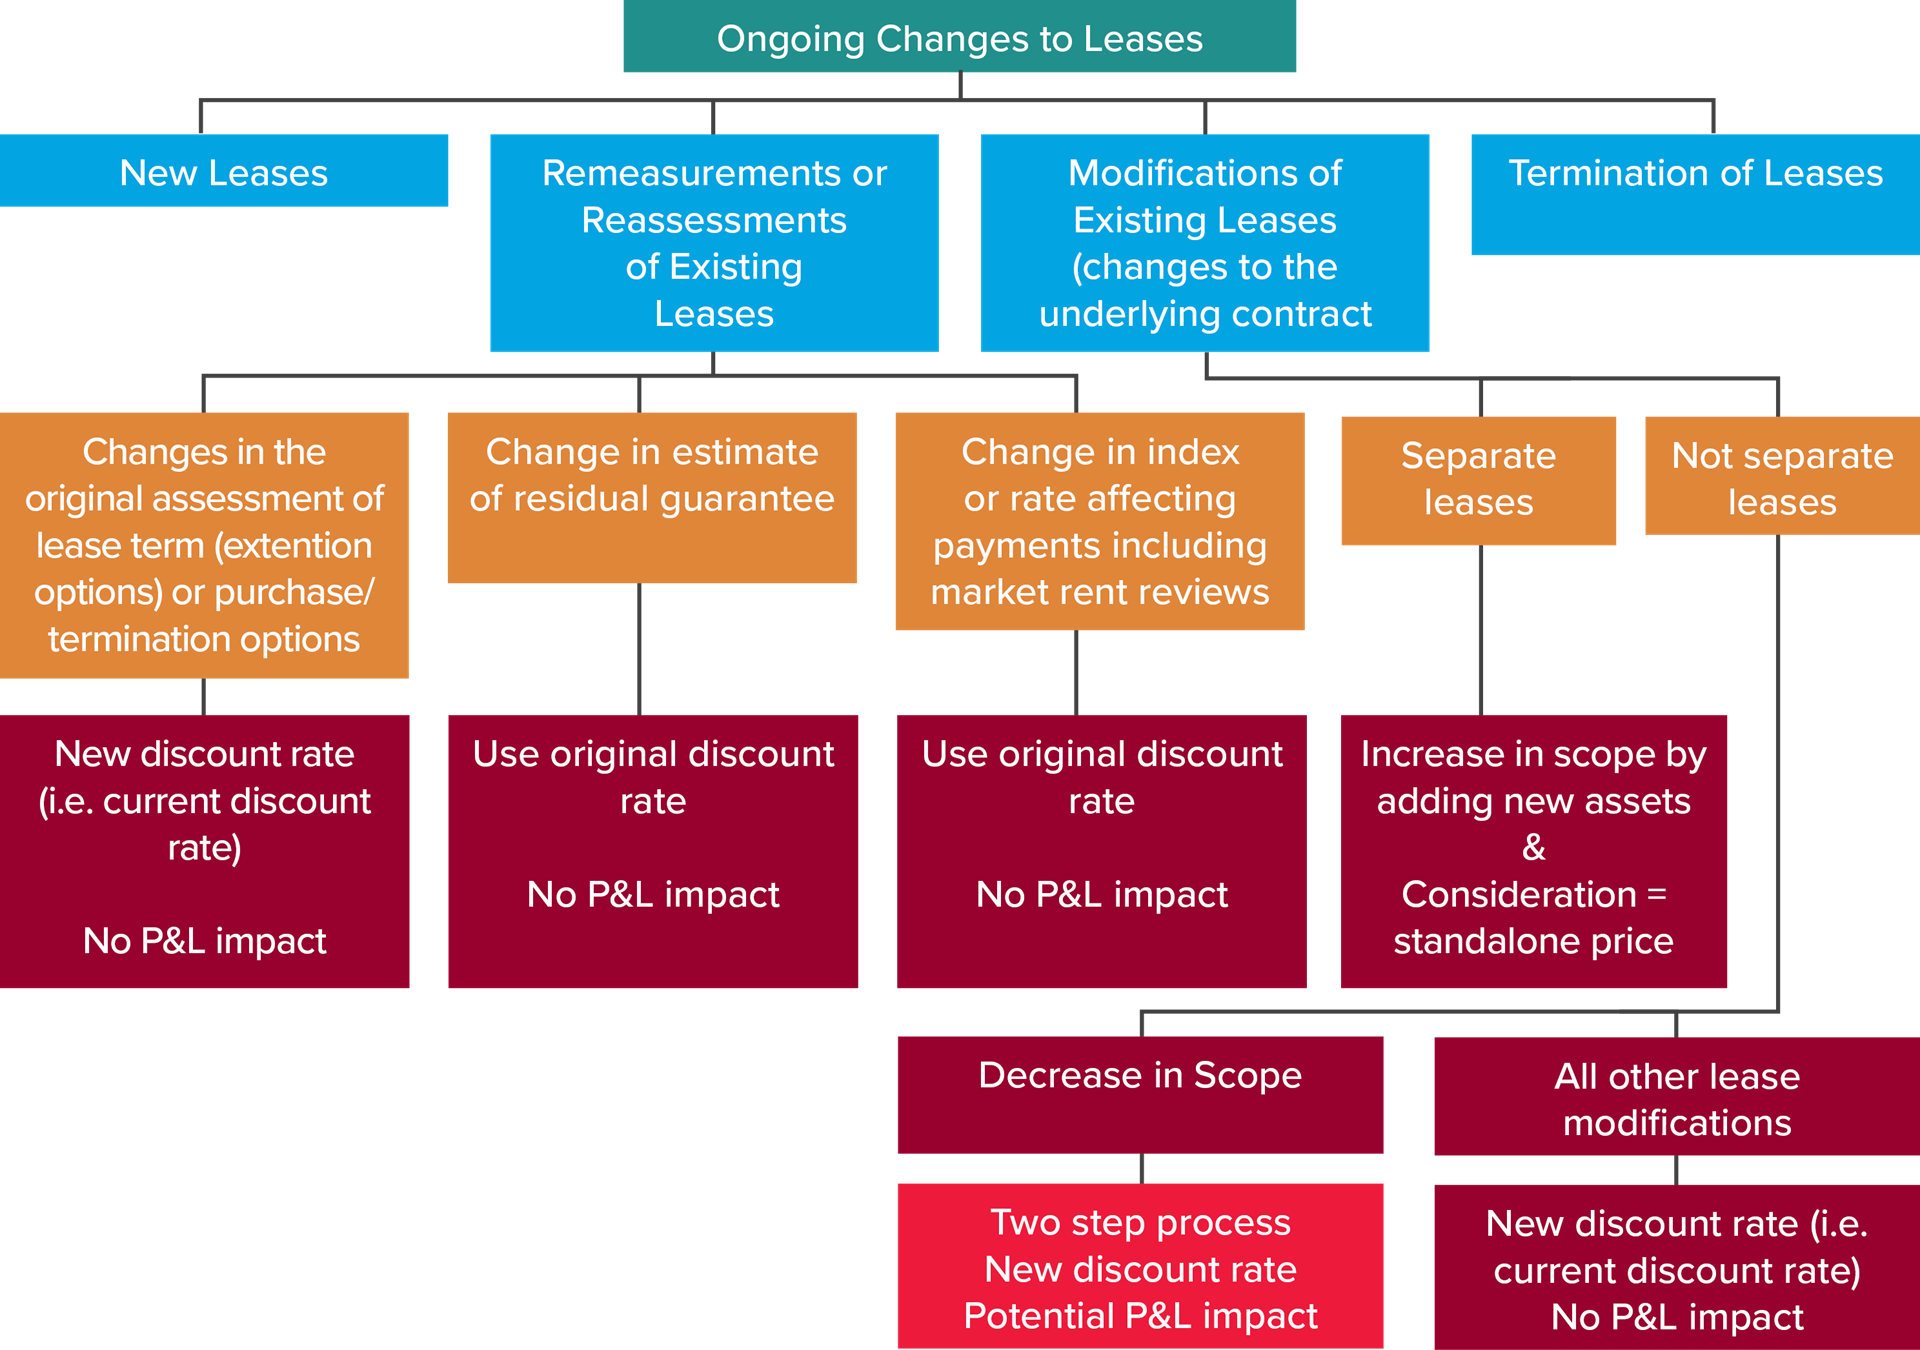 Ongoing changes to leases